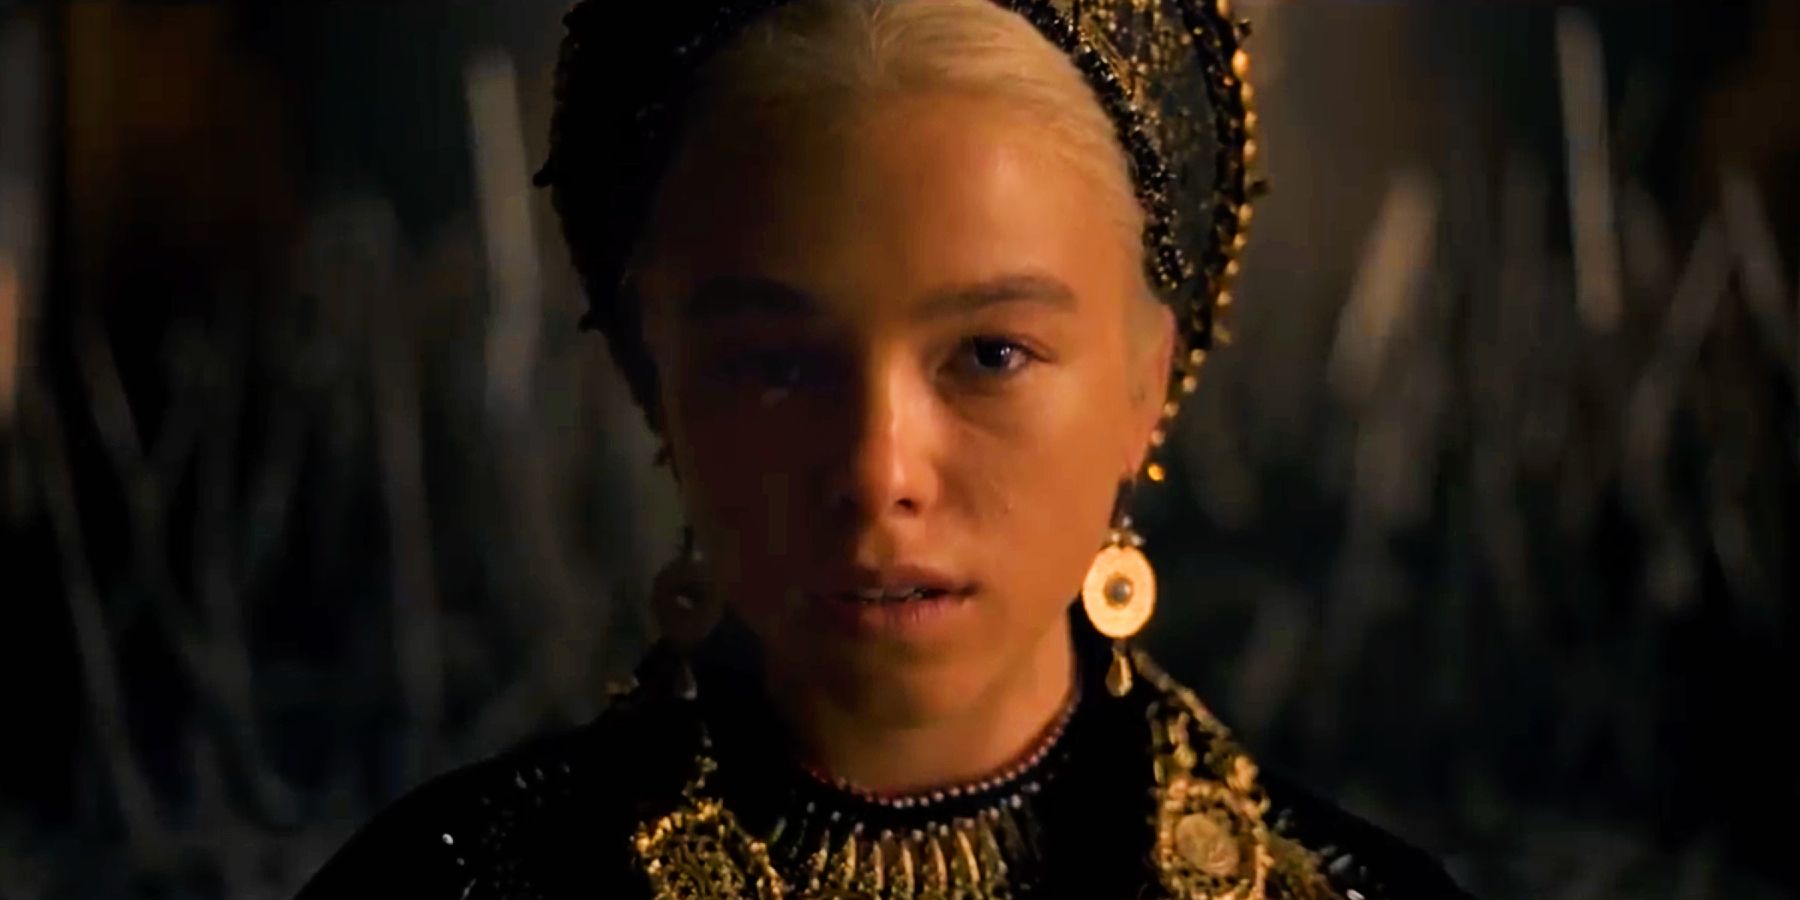 Young Rhaenyra played by Milly Alcock of Fire and Blood